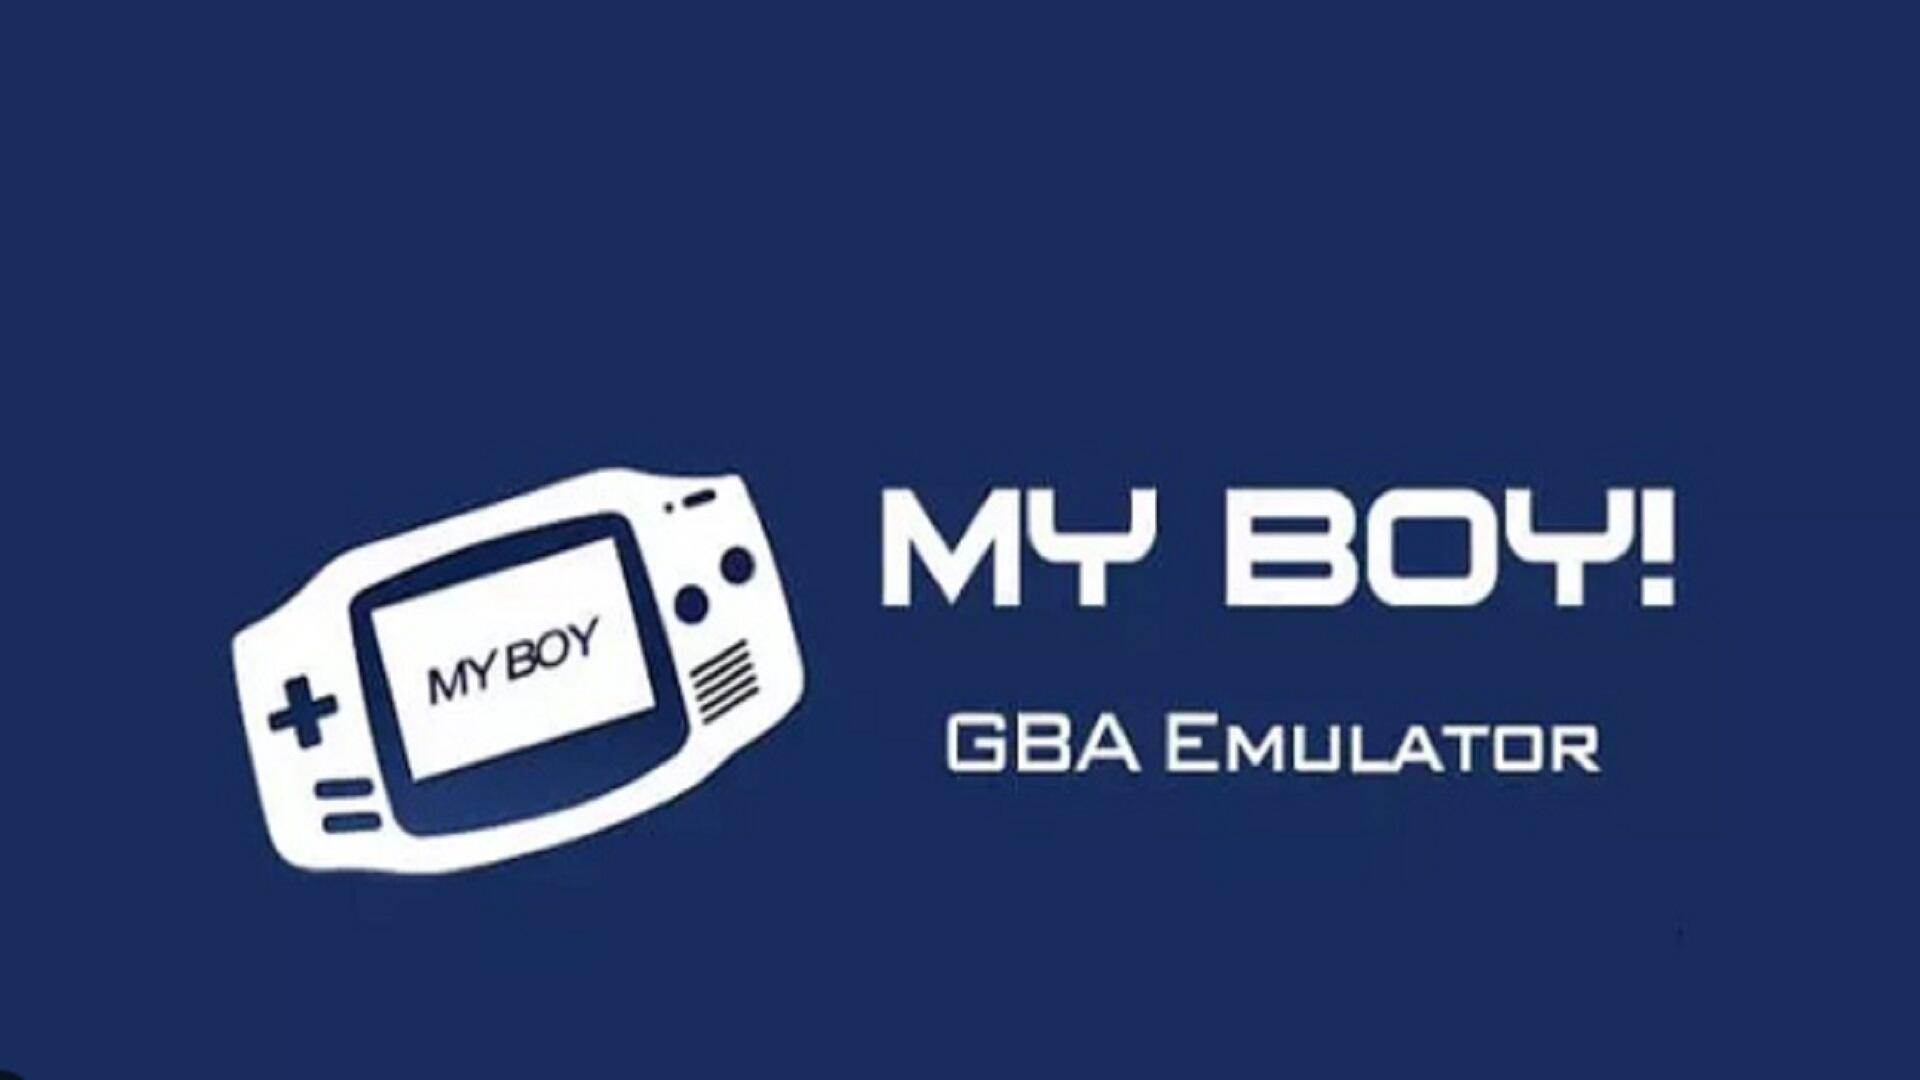 GBA Emulator iOS Download - How to Download Gba Emulator on iOS